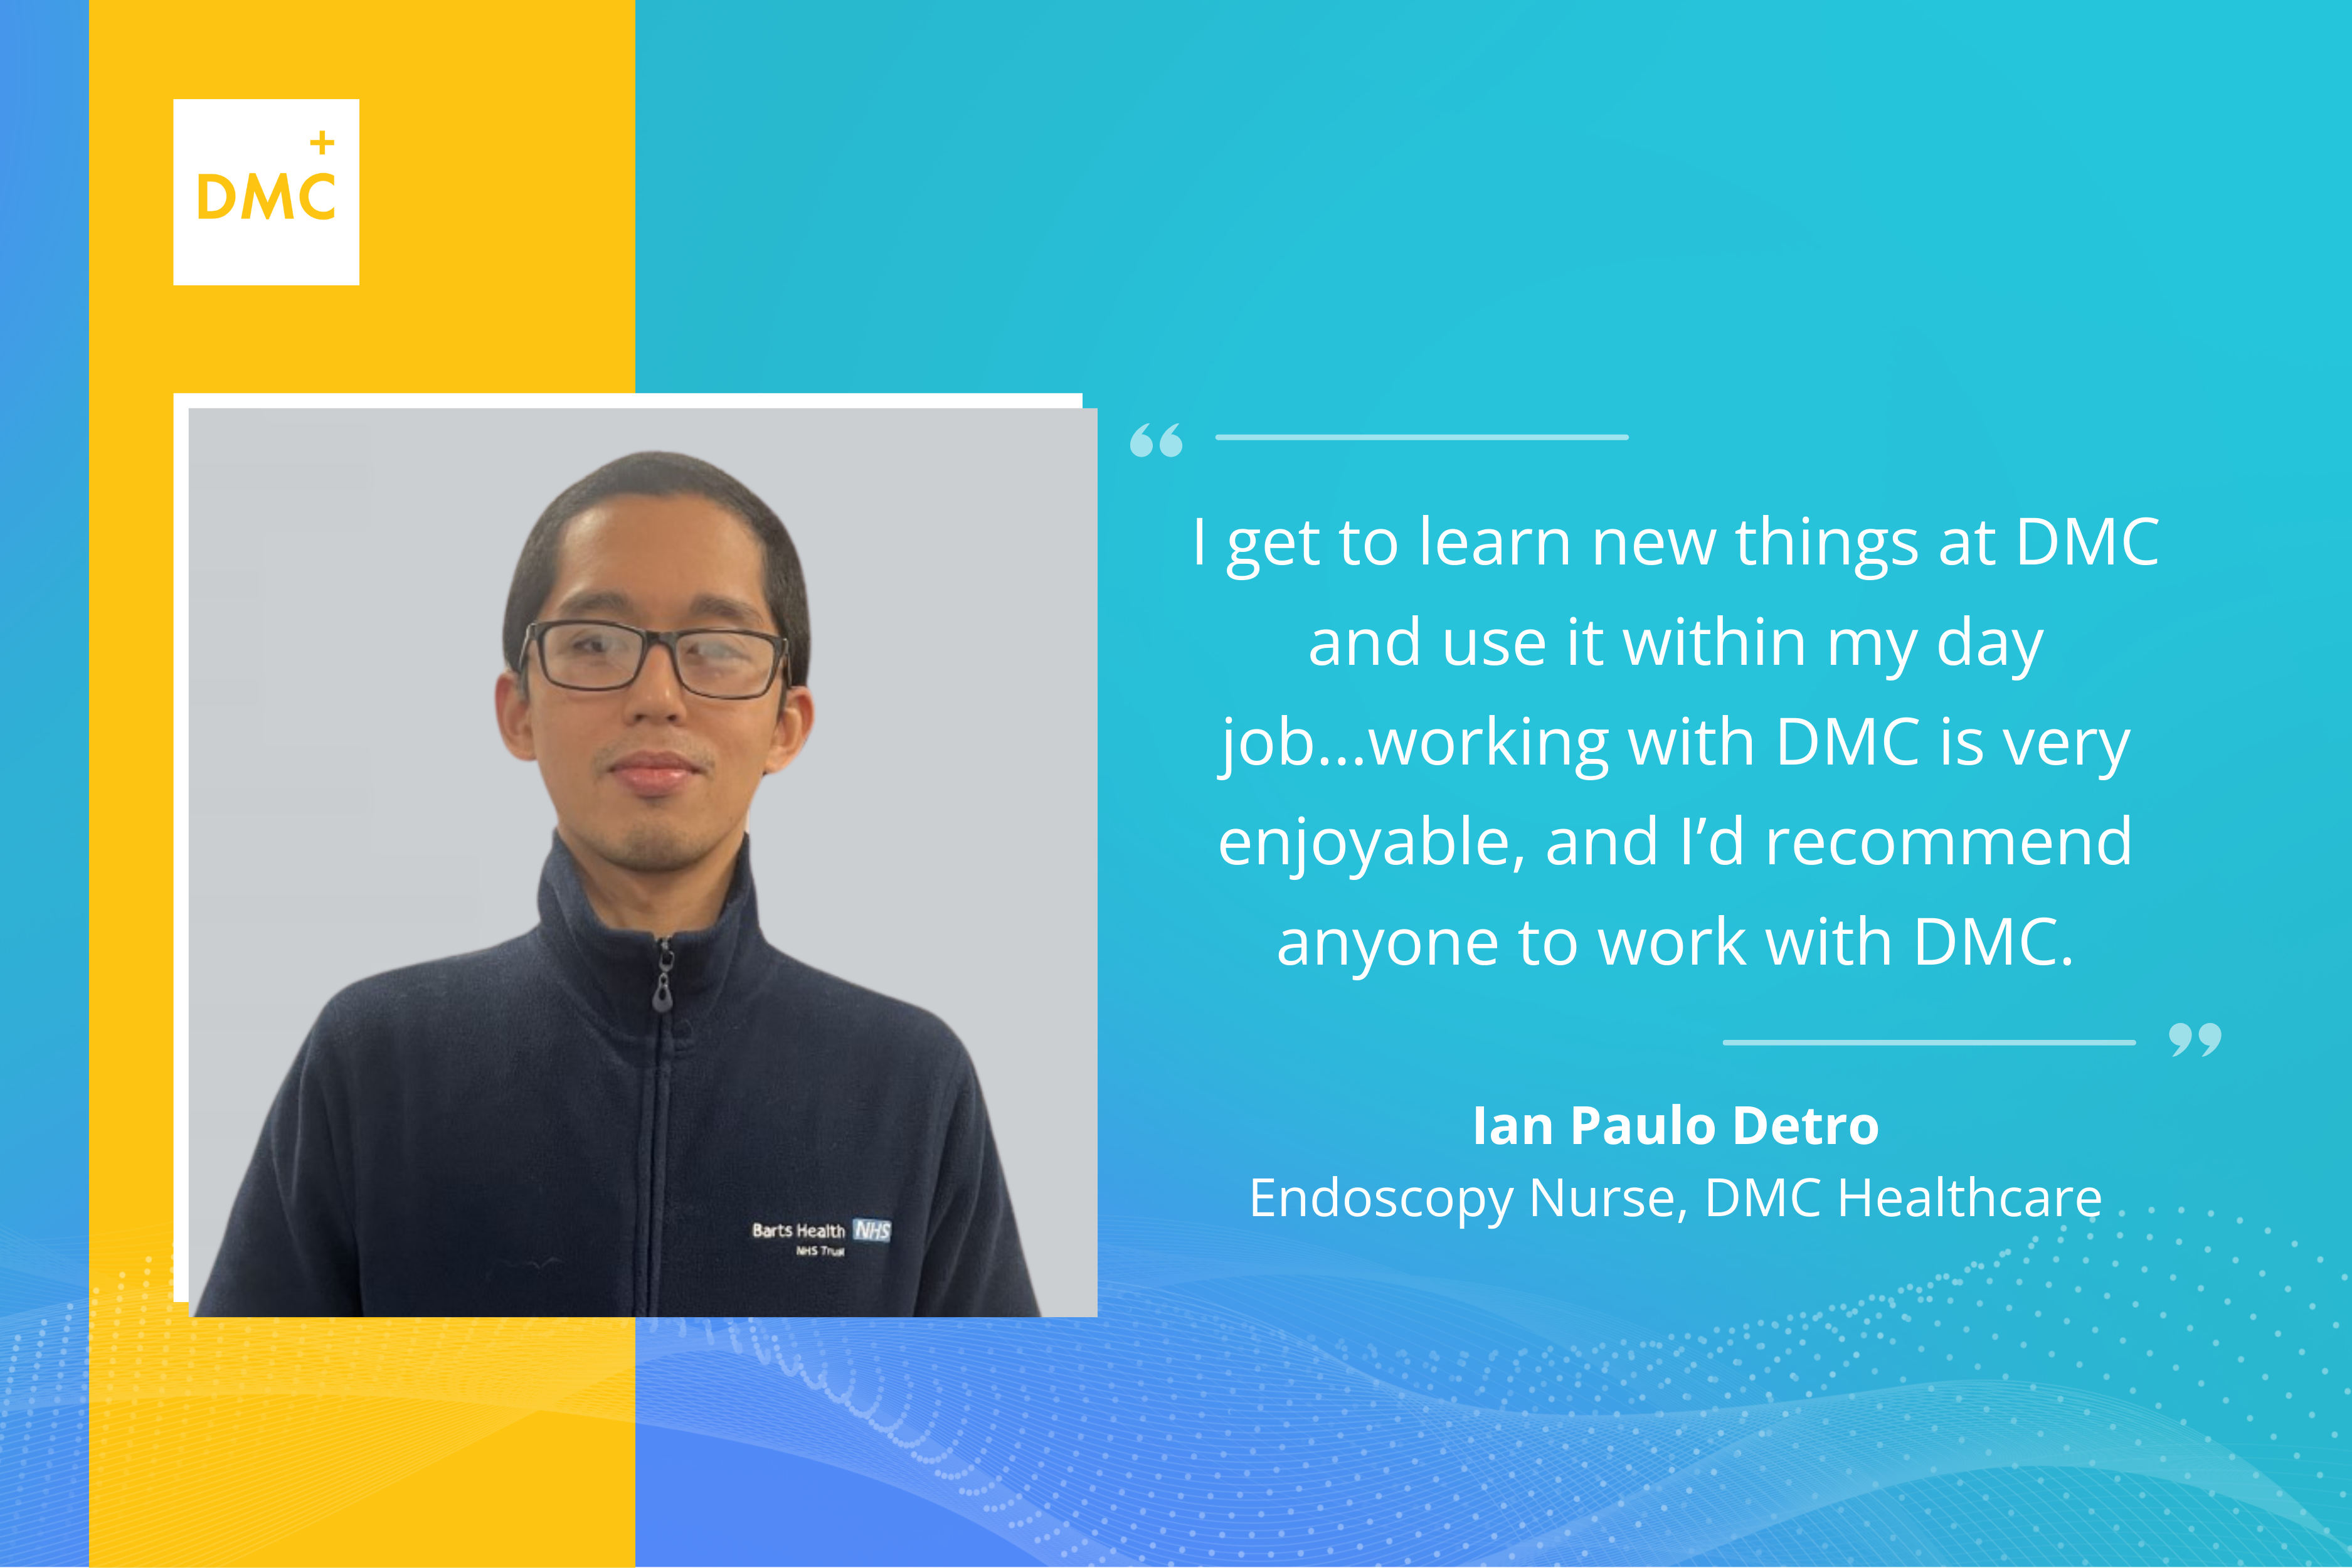 Ian Paulo Detran, Endoscopy Nurse at DMC Healthcare, tells us about his work in insourcing and how he has really developed in the role.